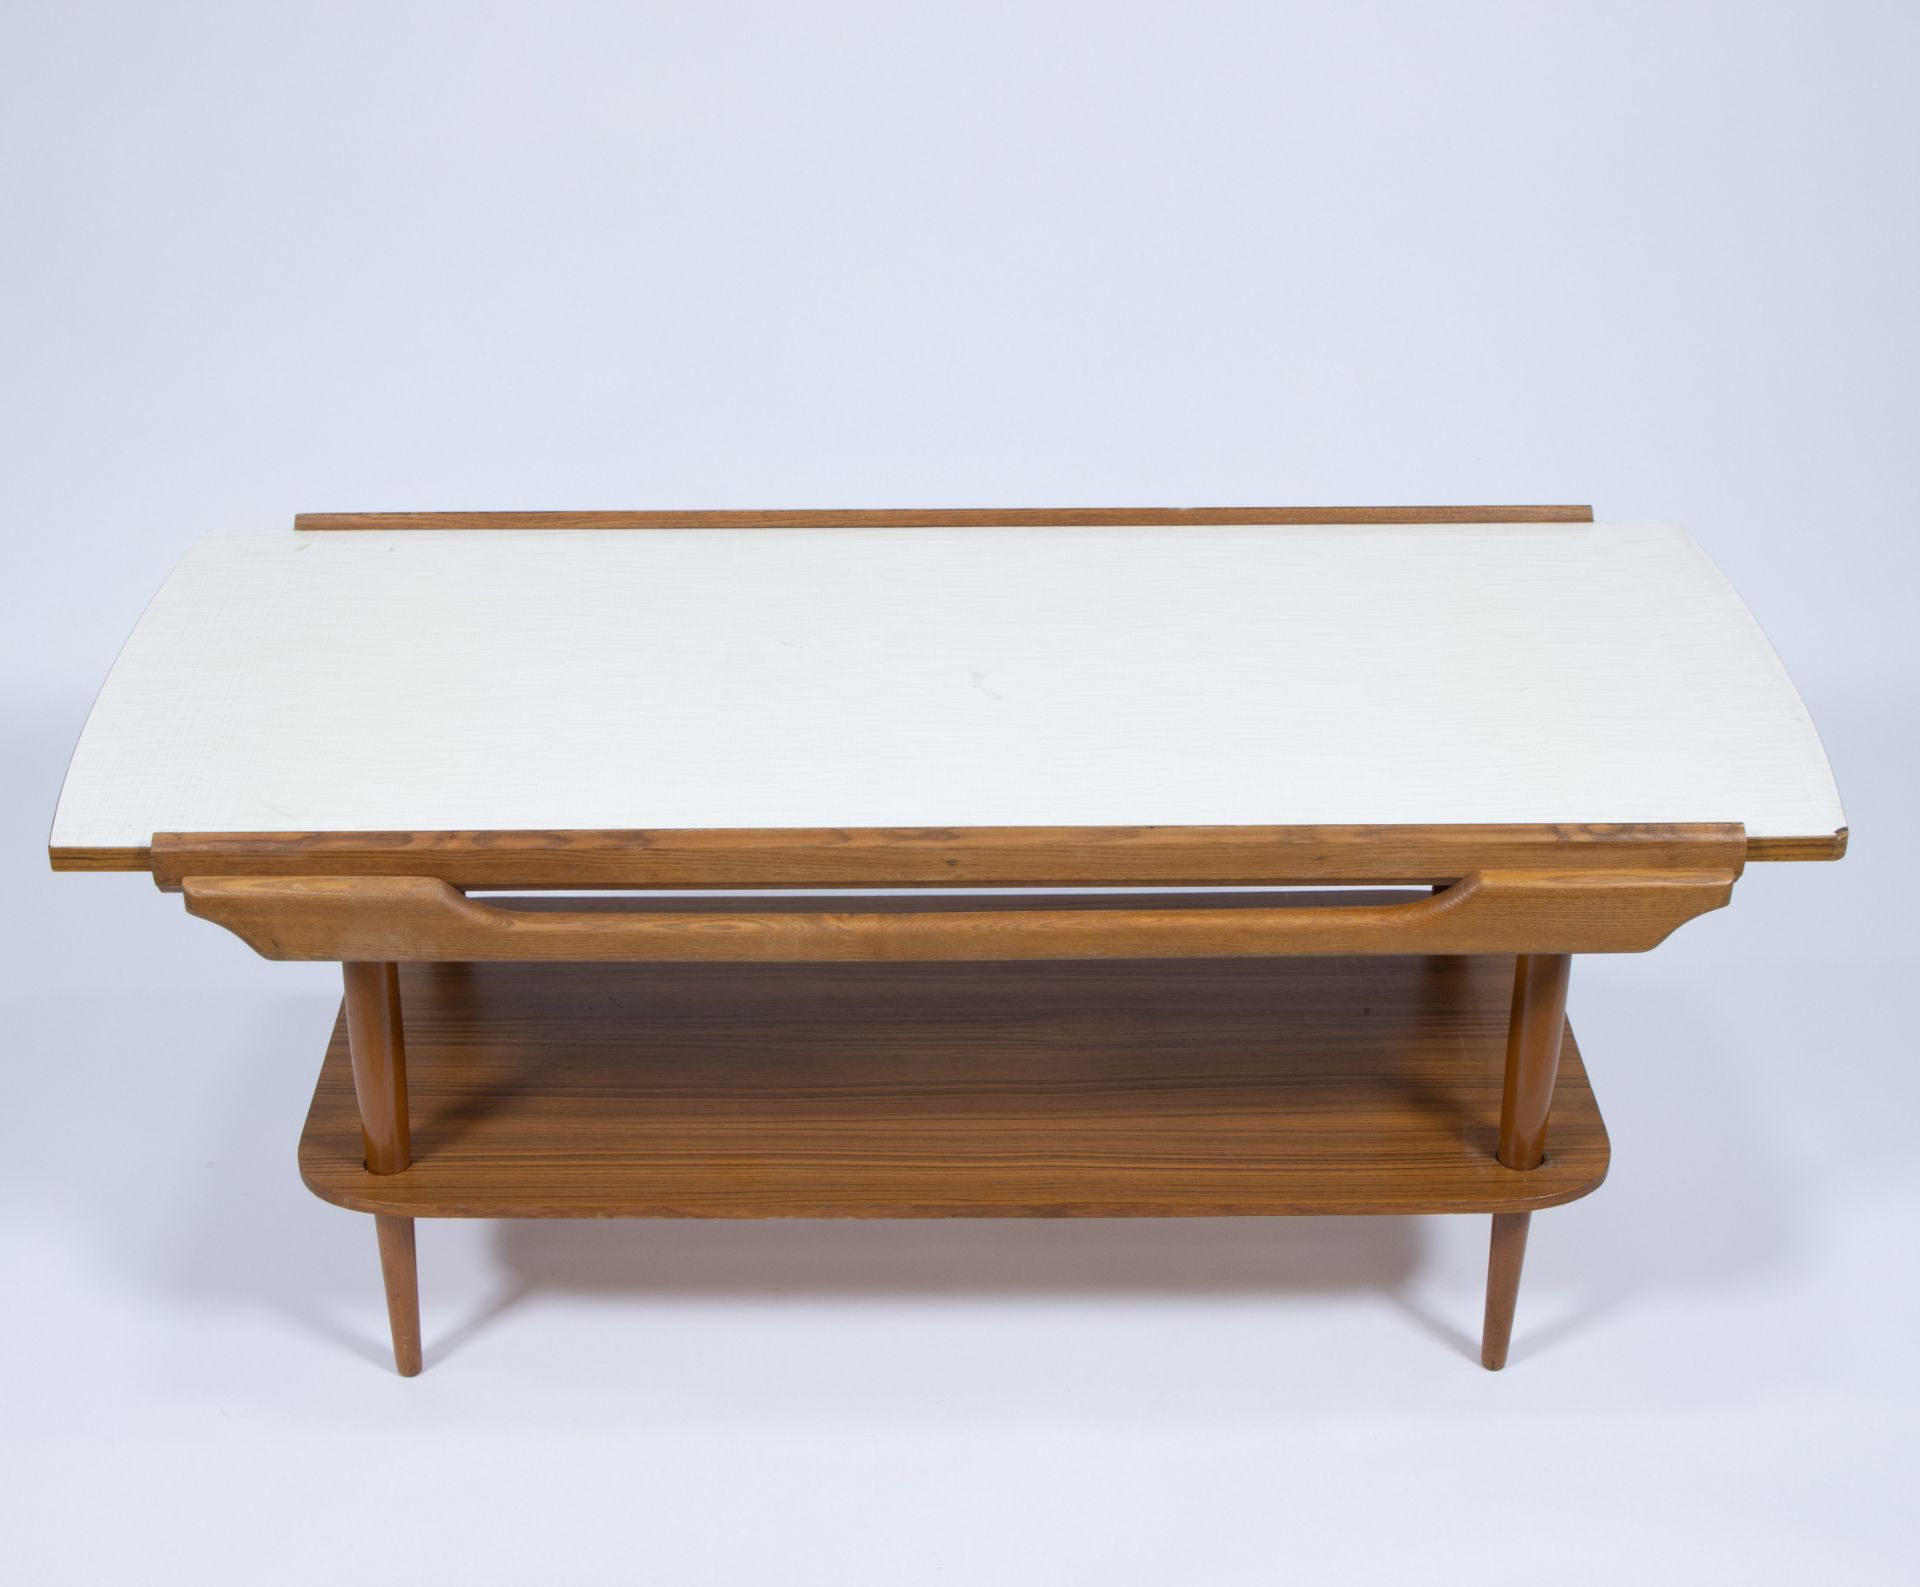 Vintage coffee table with removable top, Scandinavian design, 1960s - Image 2 of 3